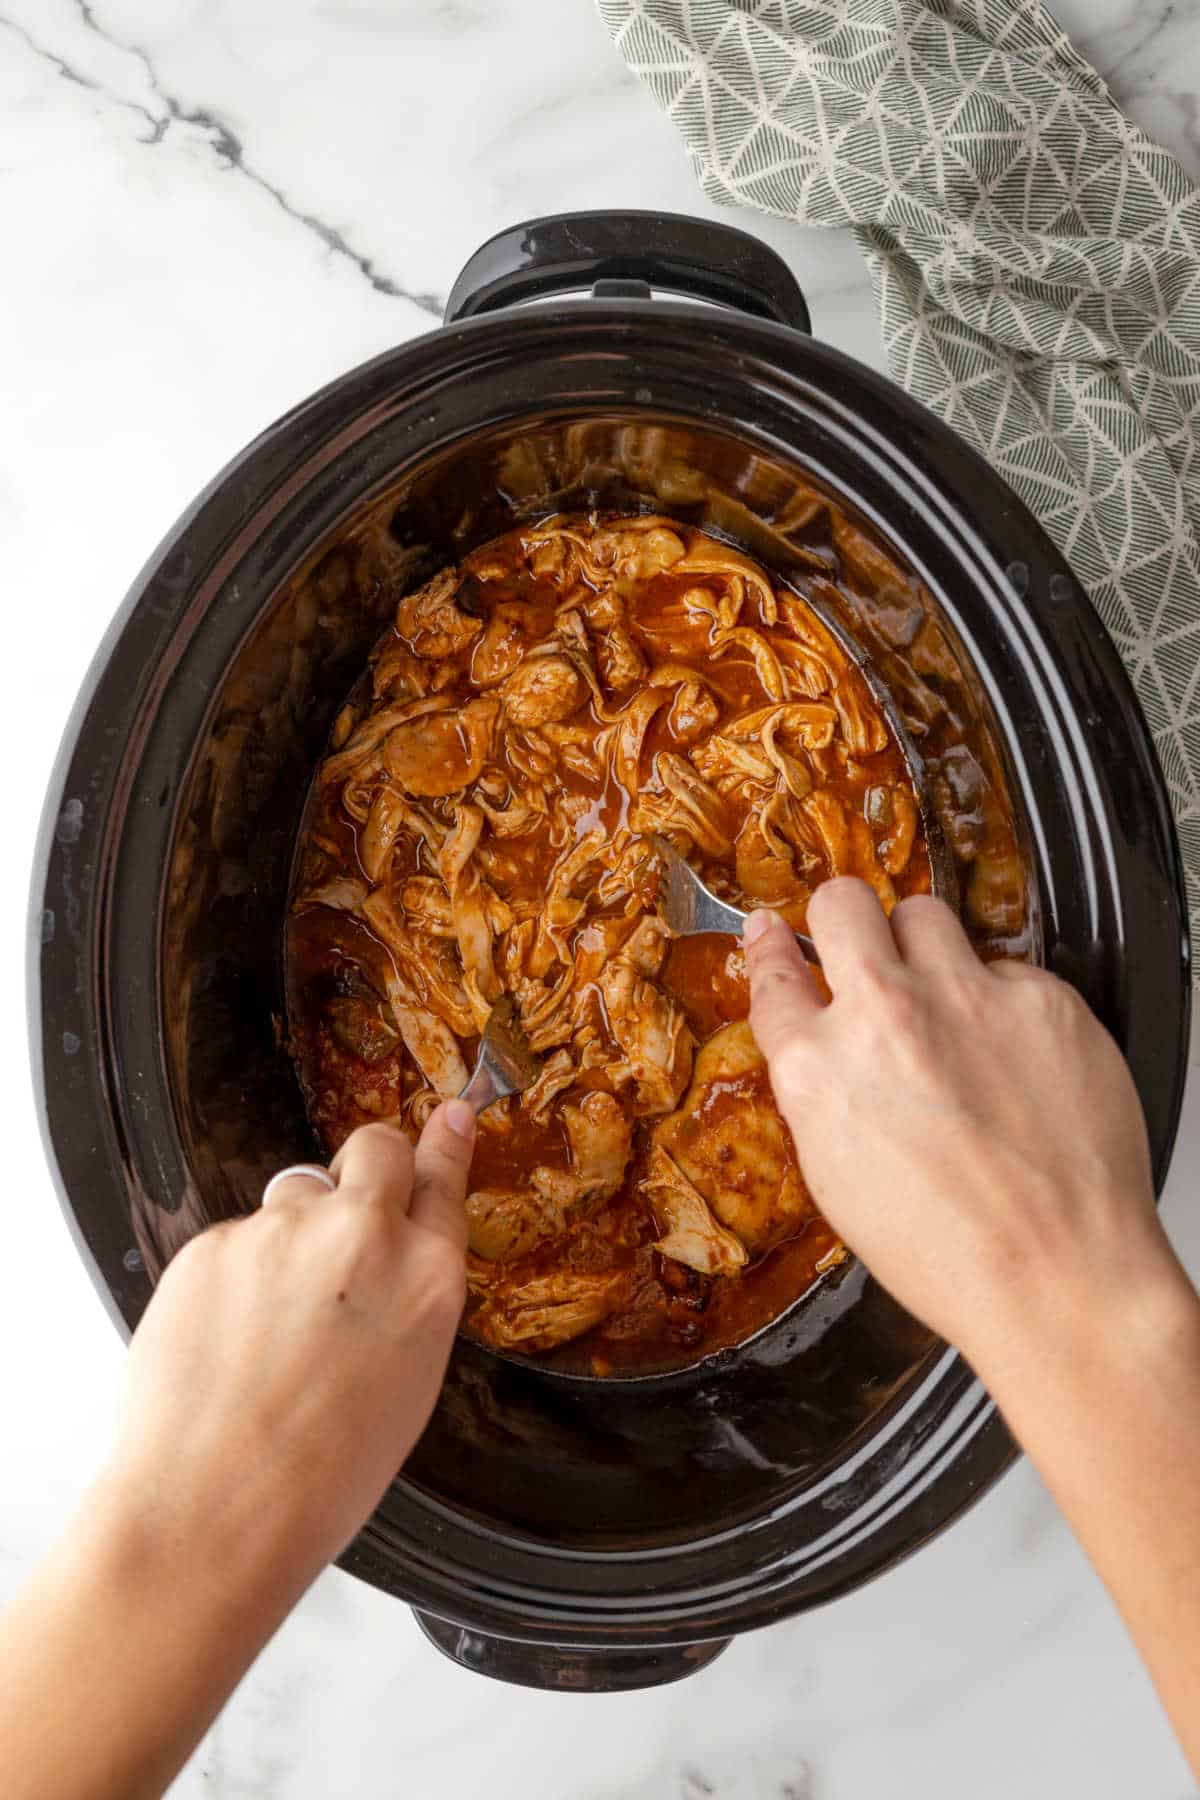 Two hands shredded chicken in a crock pot with forks.